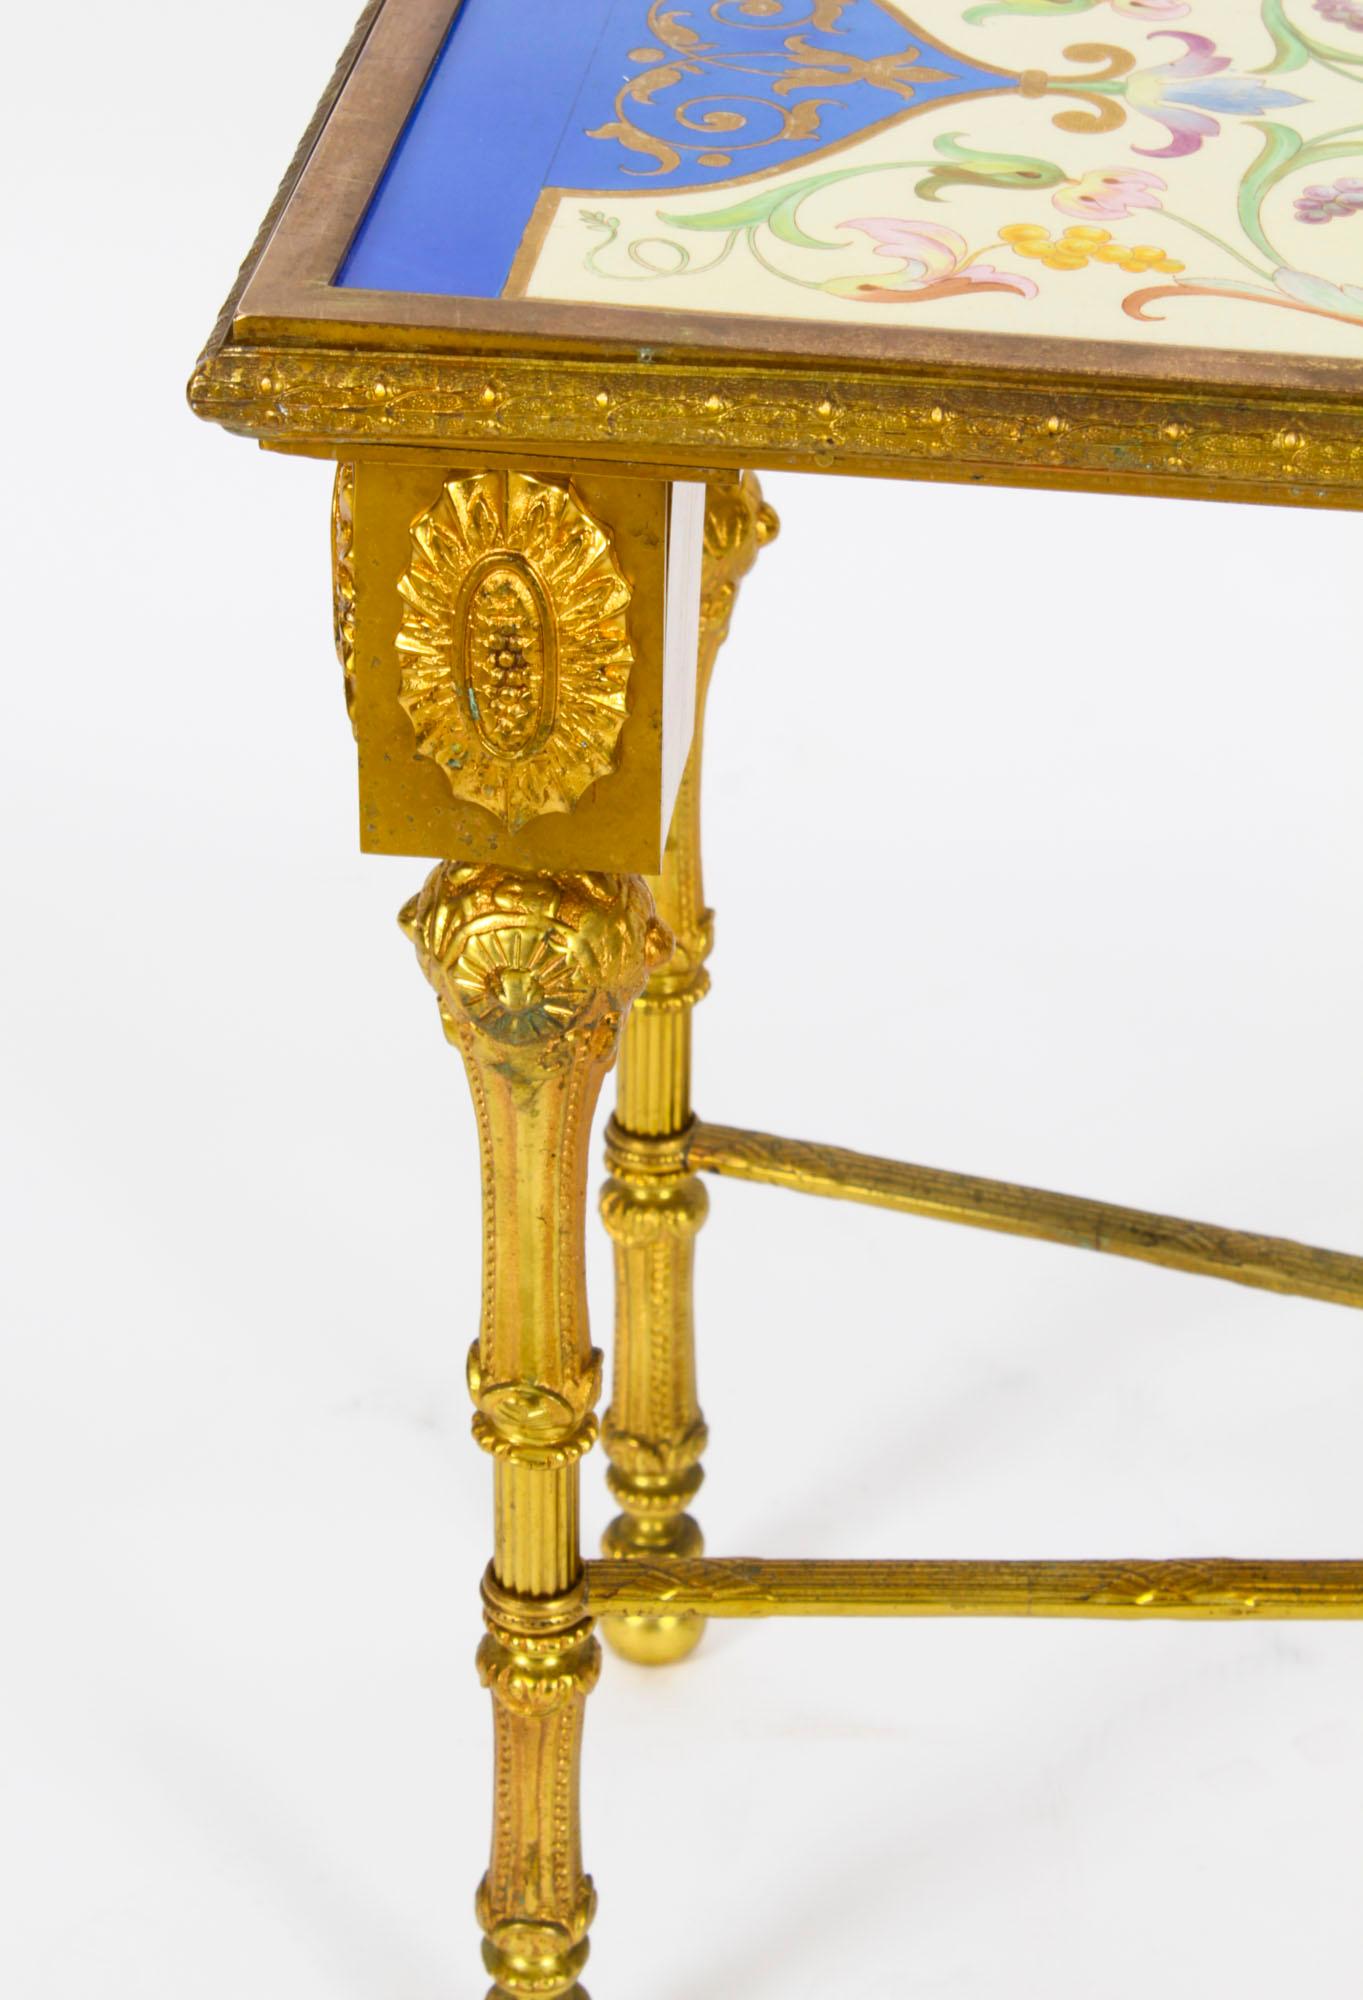 Antique Regency Revival Ormolu Mounted Table Display Stand Late 19th C 8